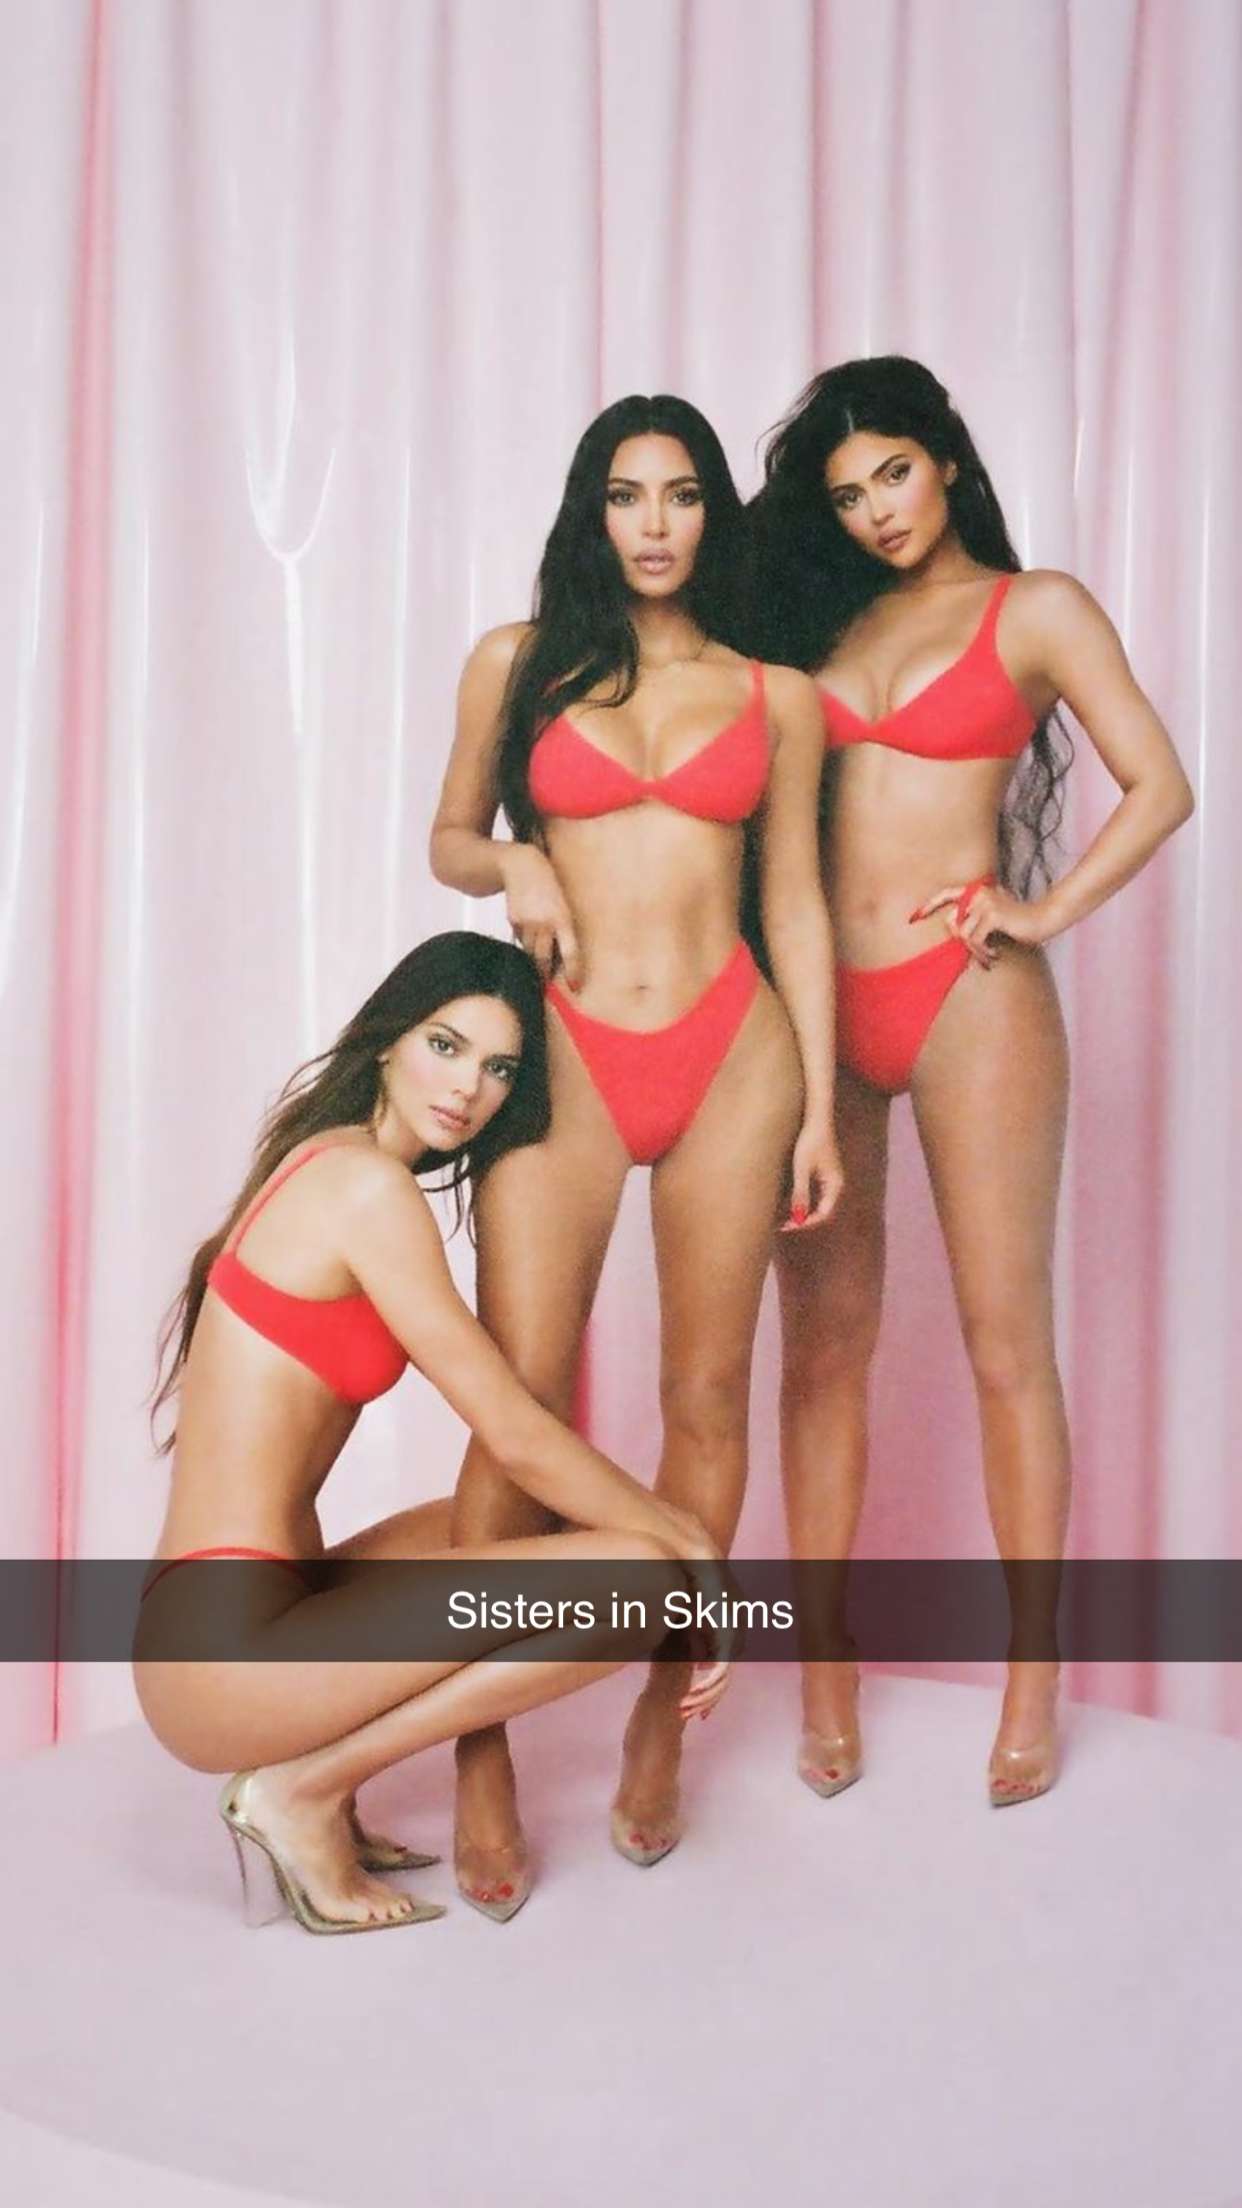 The collection featured Kim Kardashian and her sisters Kendall and Kylie Jenner